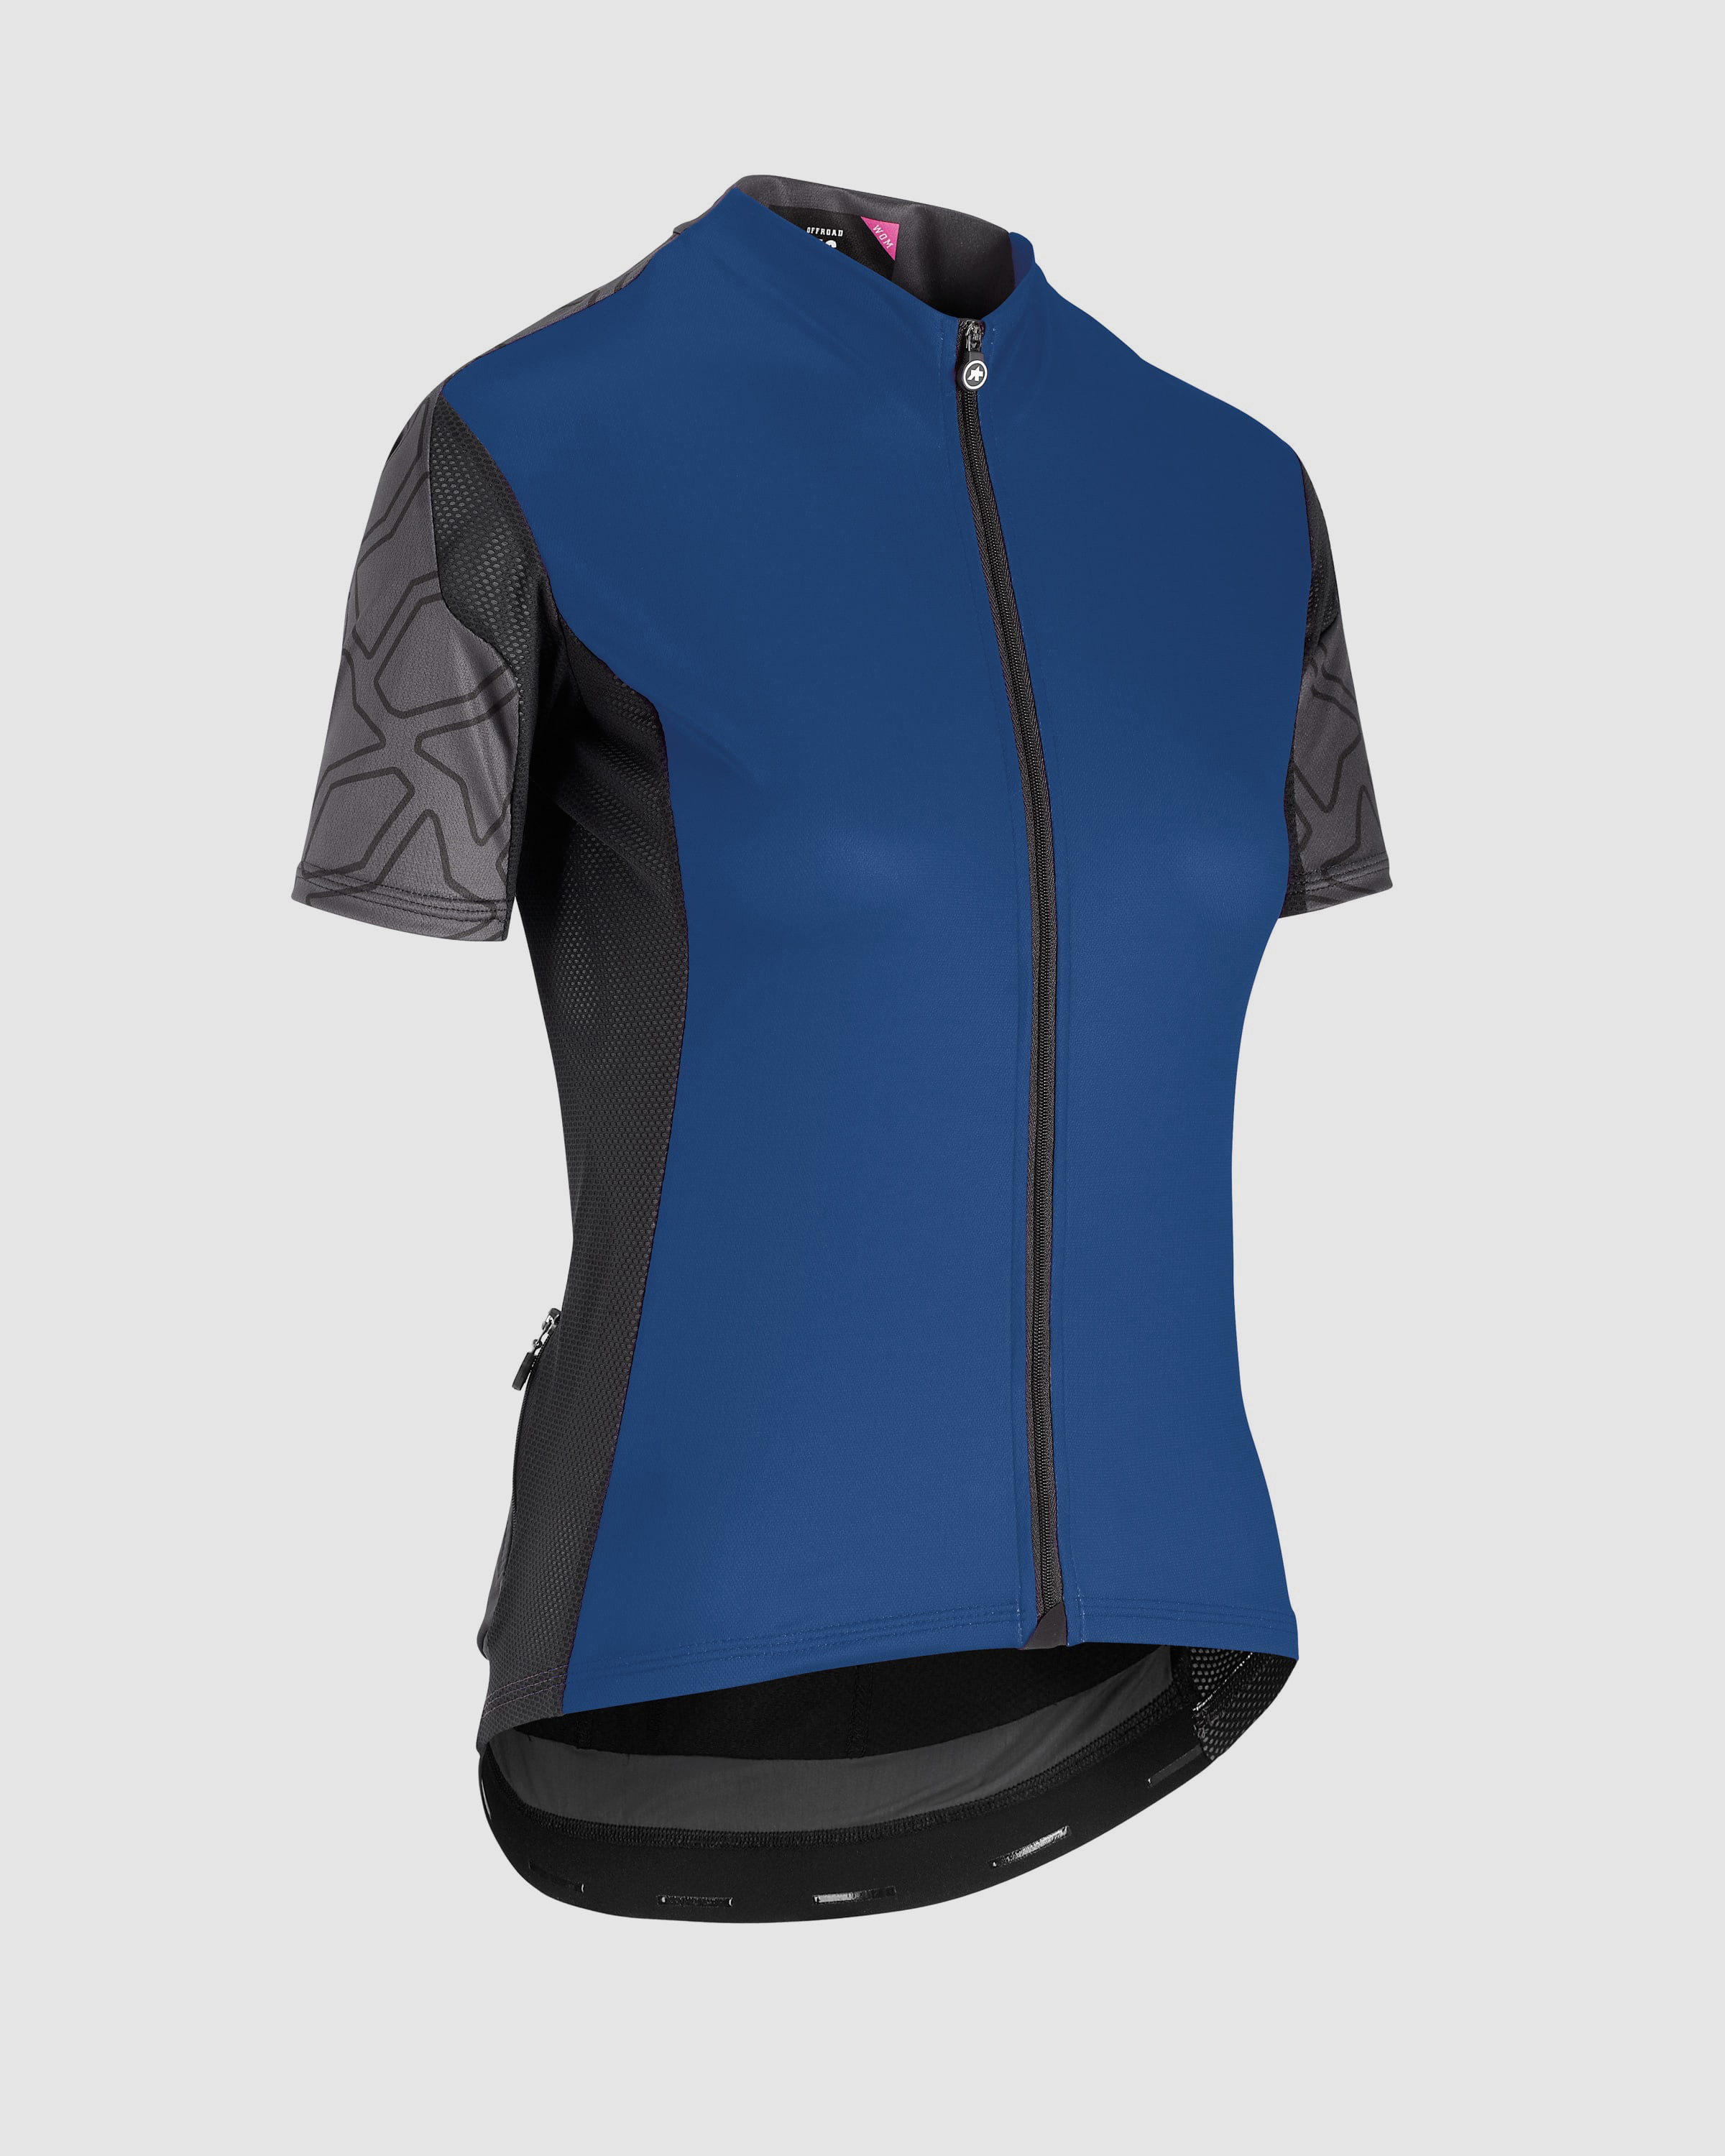 XC short sleeve jersey woman - ASSOS Of Switzerland - Official Outlet